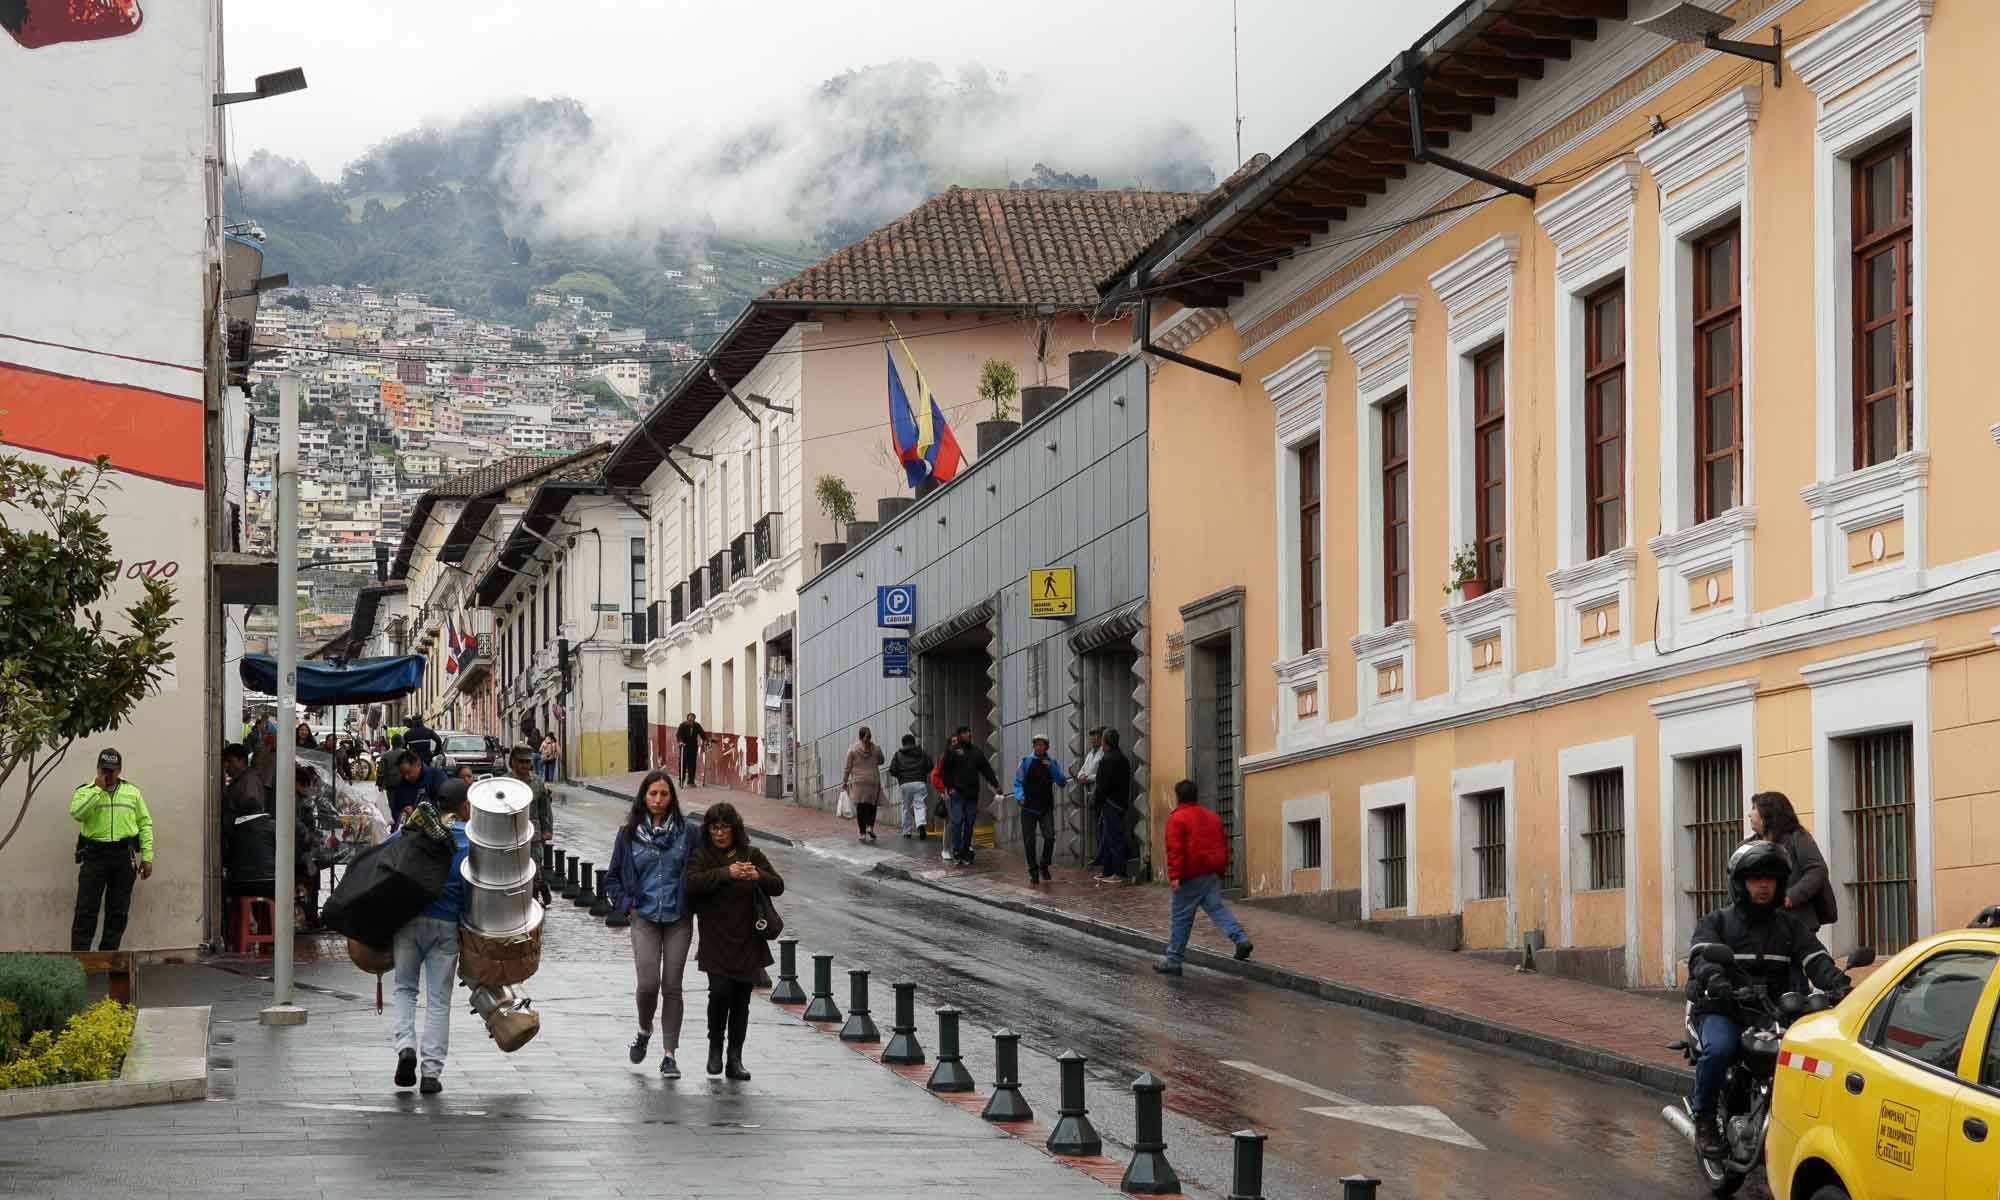 A rainy day in Quito